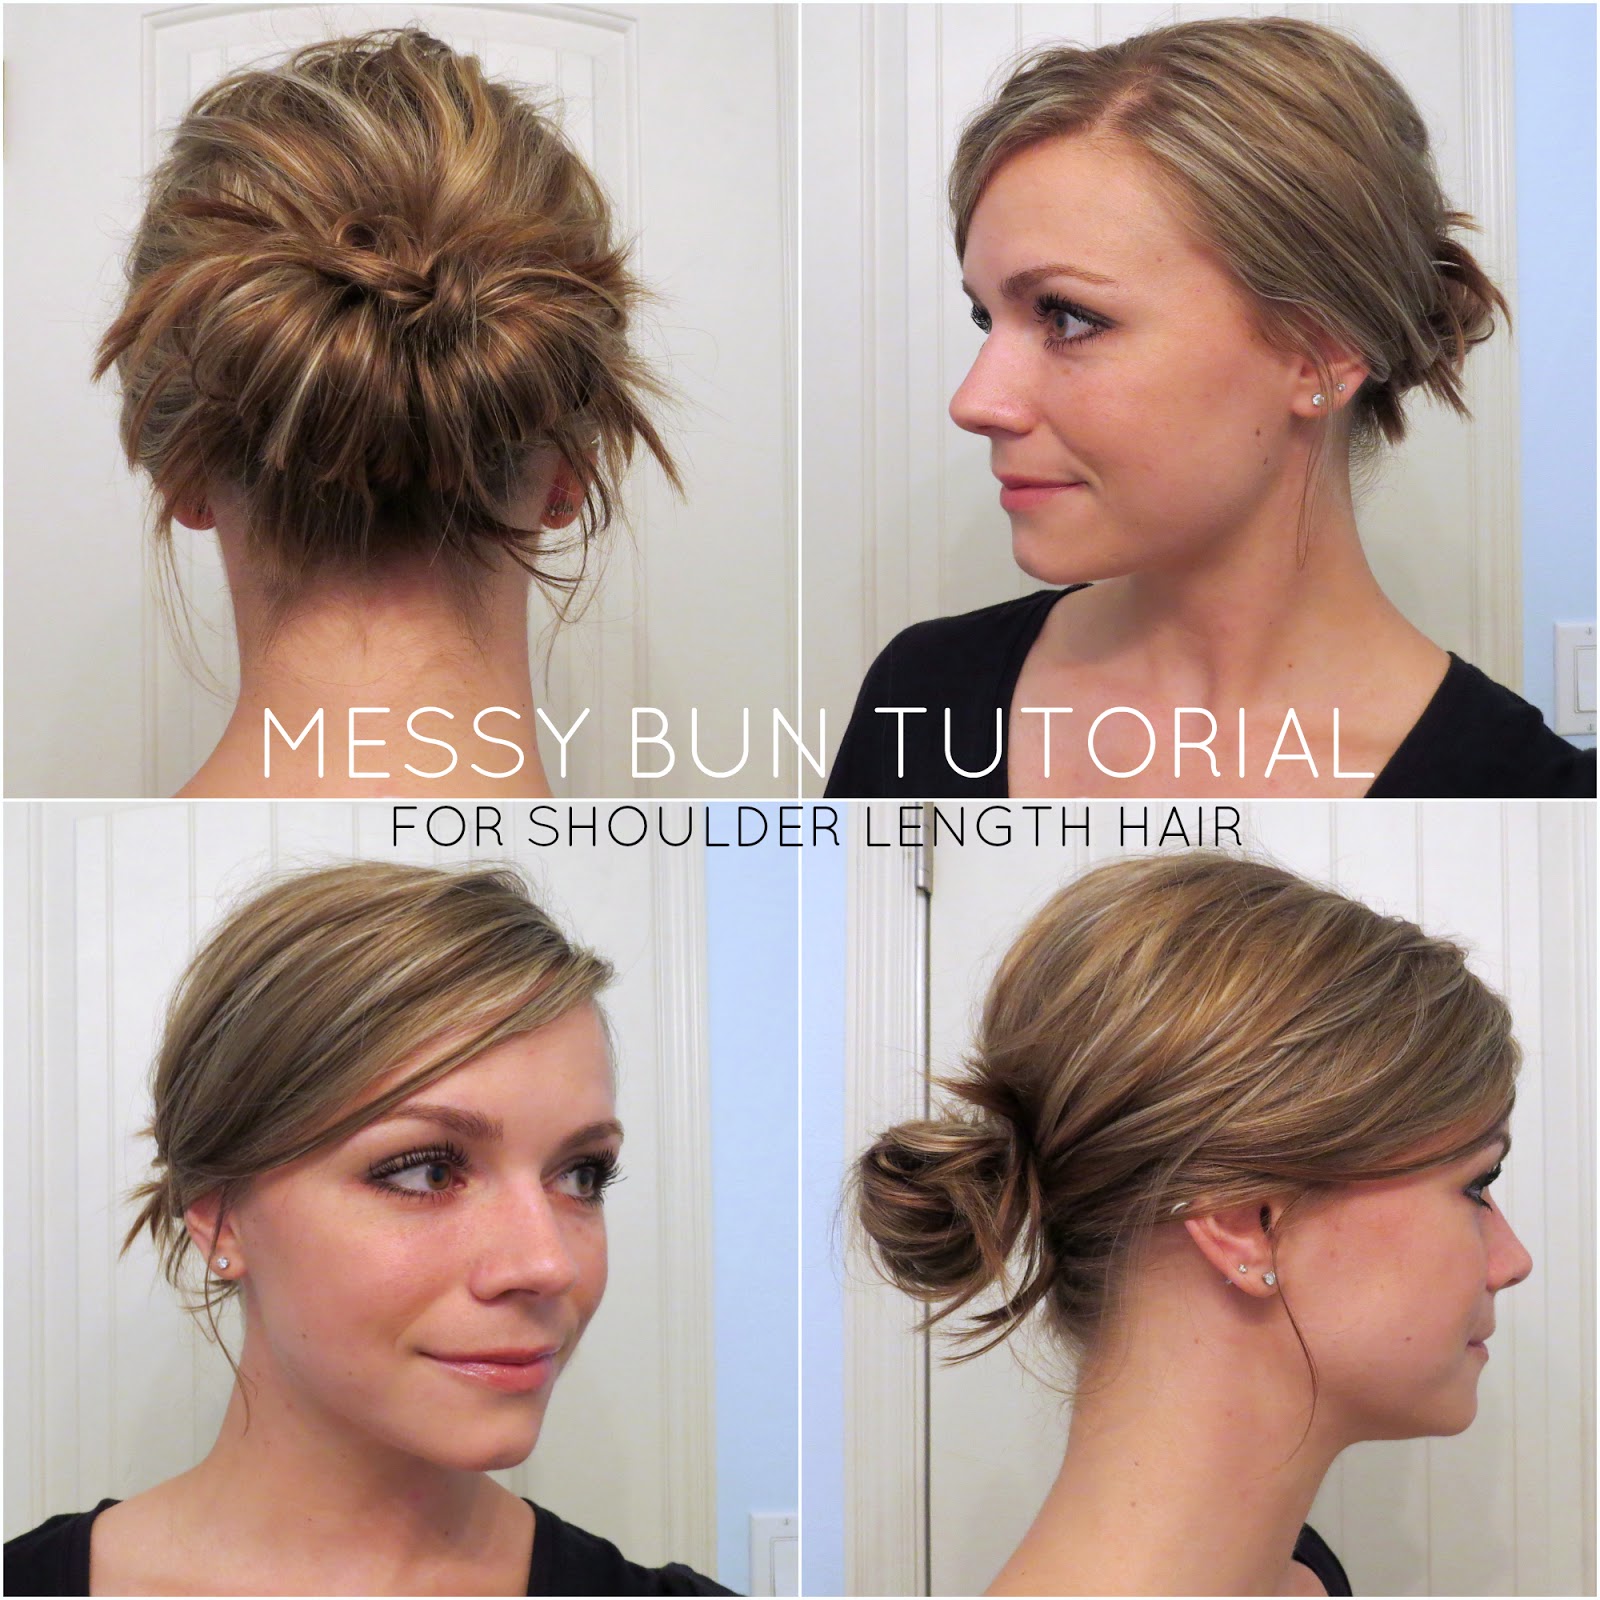 Bye Bye Beehive A Hairstyle Blog Messy Bun For Shoulder Length